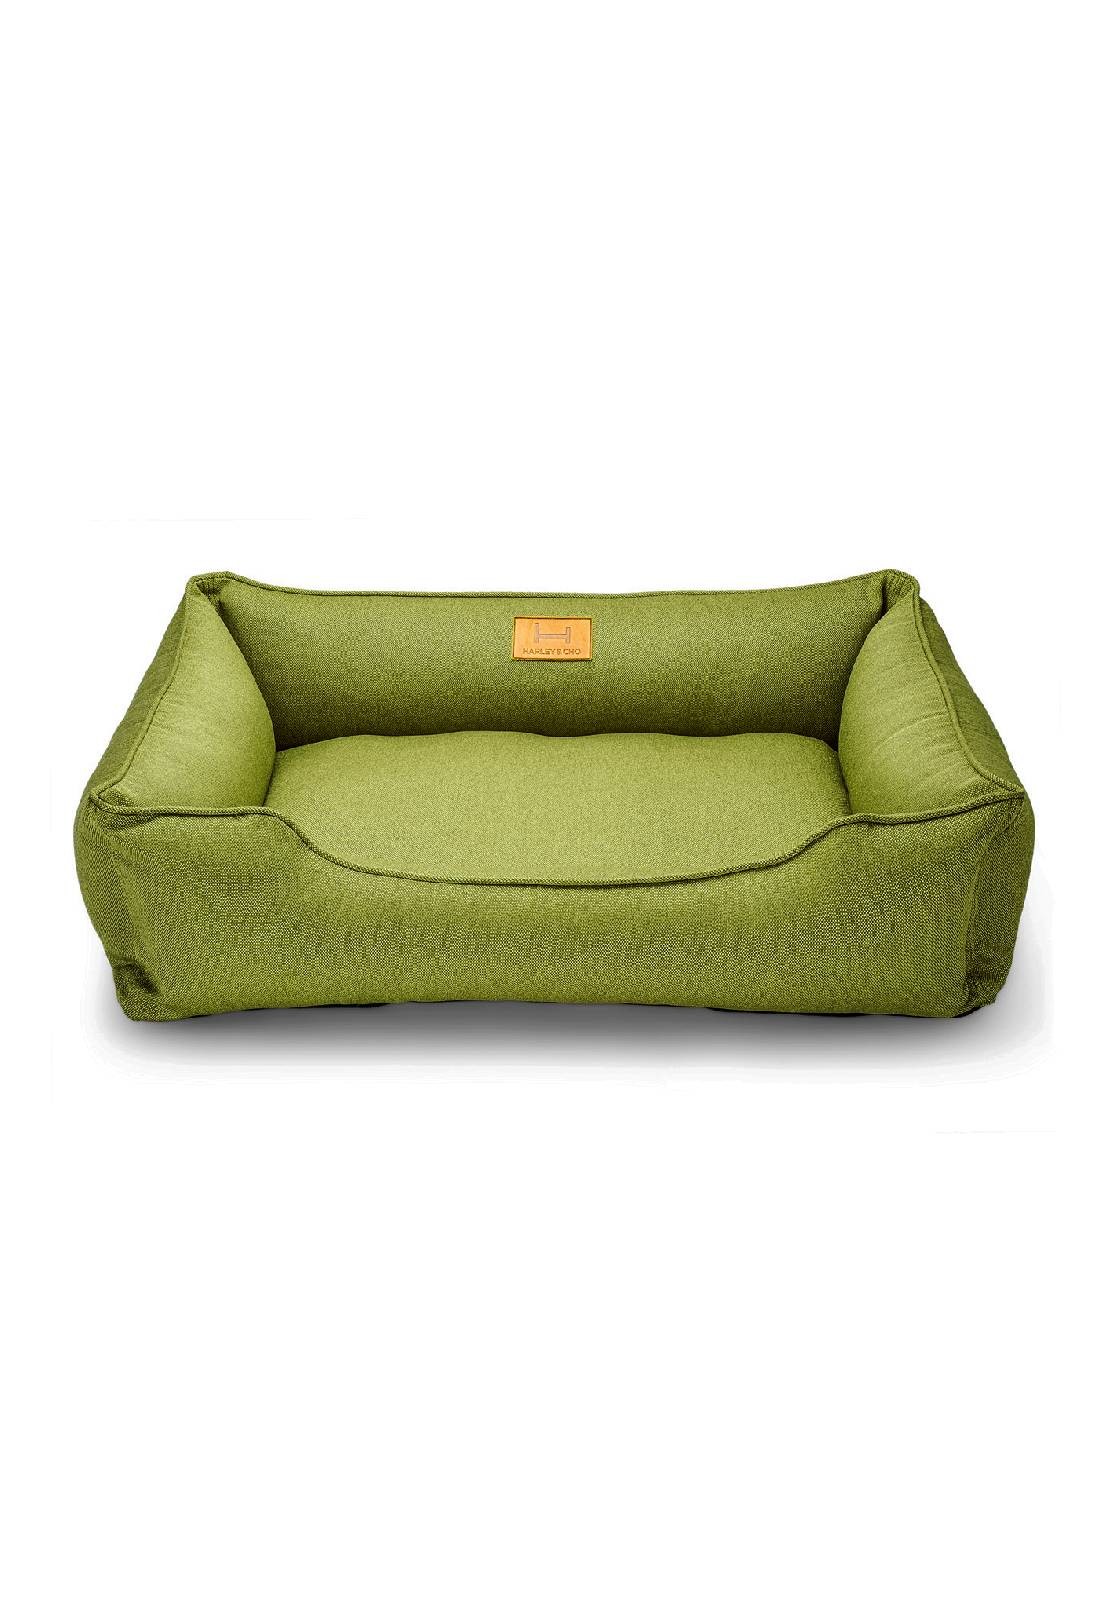 Pet bed Harley and Cho Dreamer Olive M (70x50 cm) 3010087